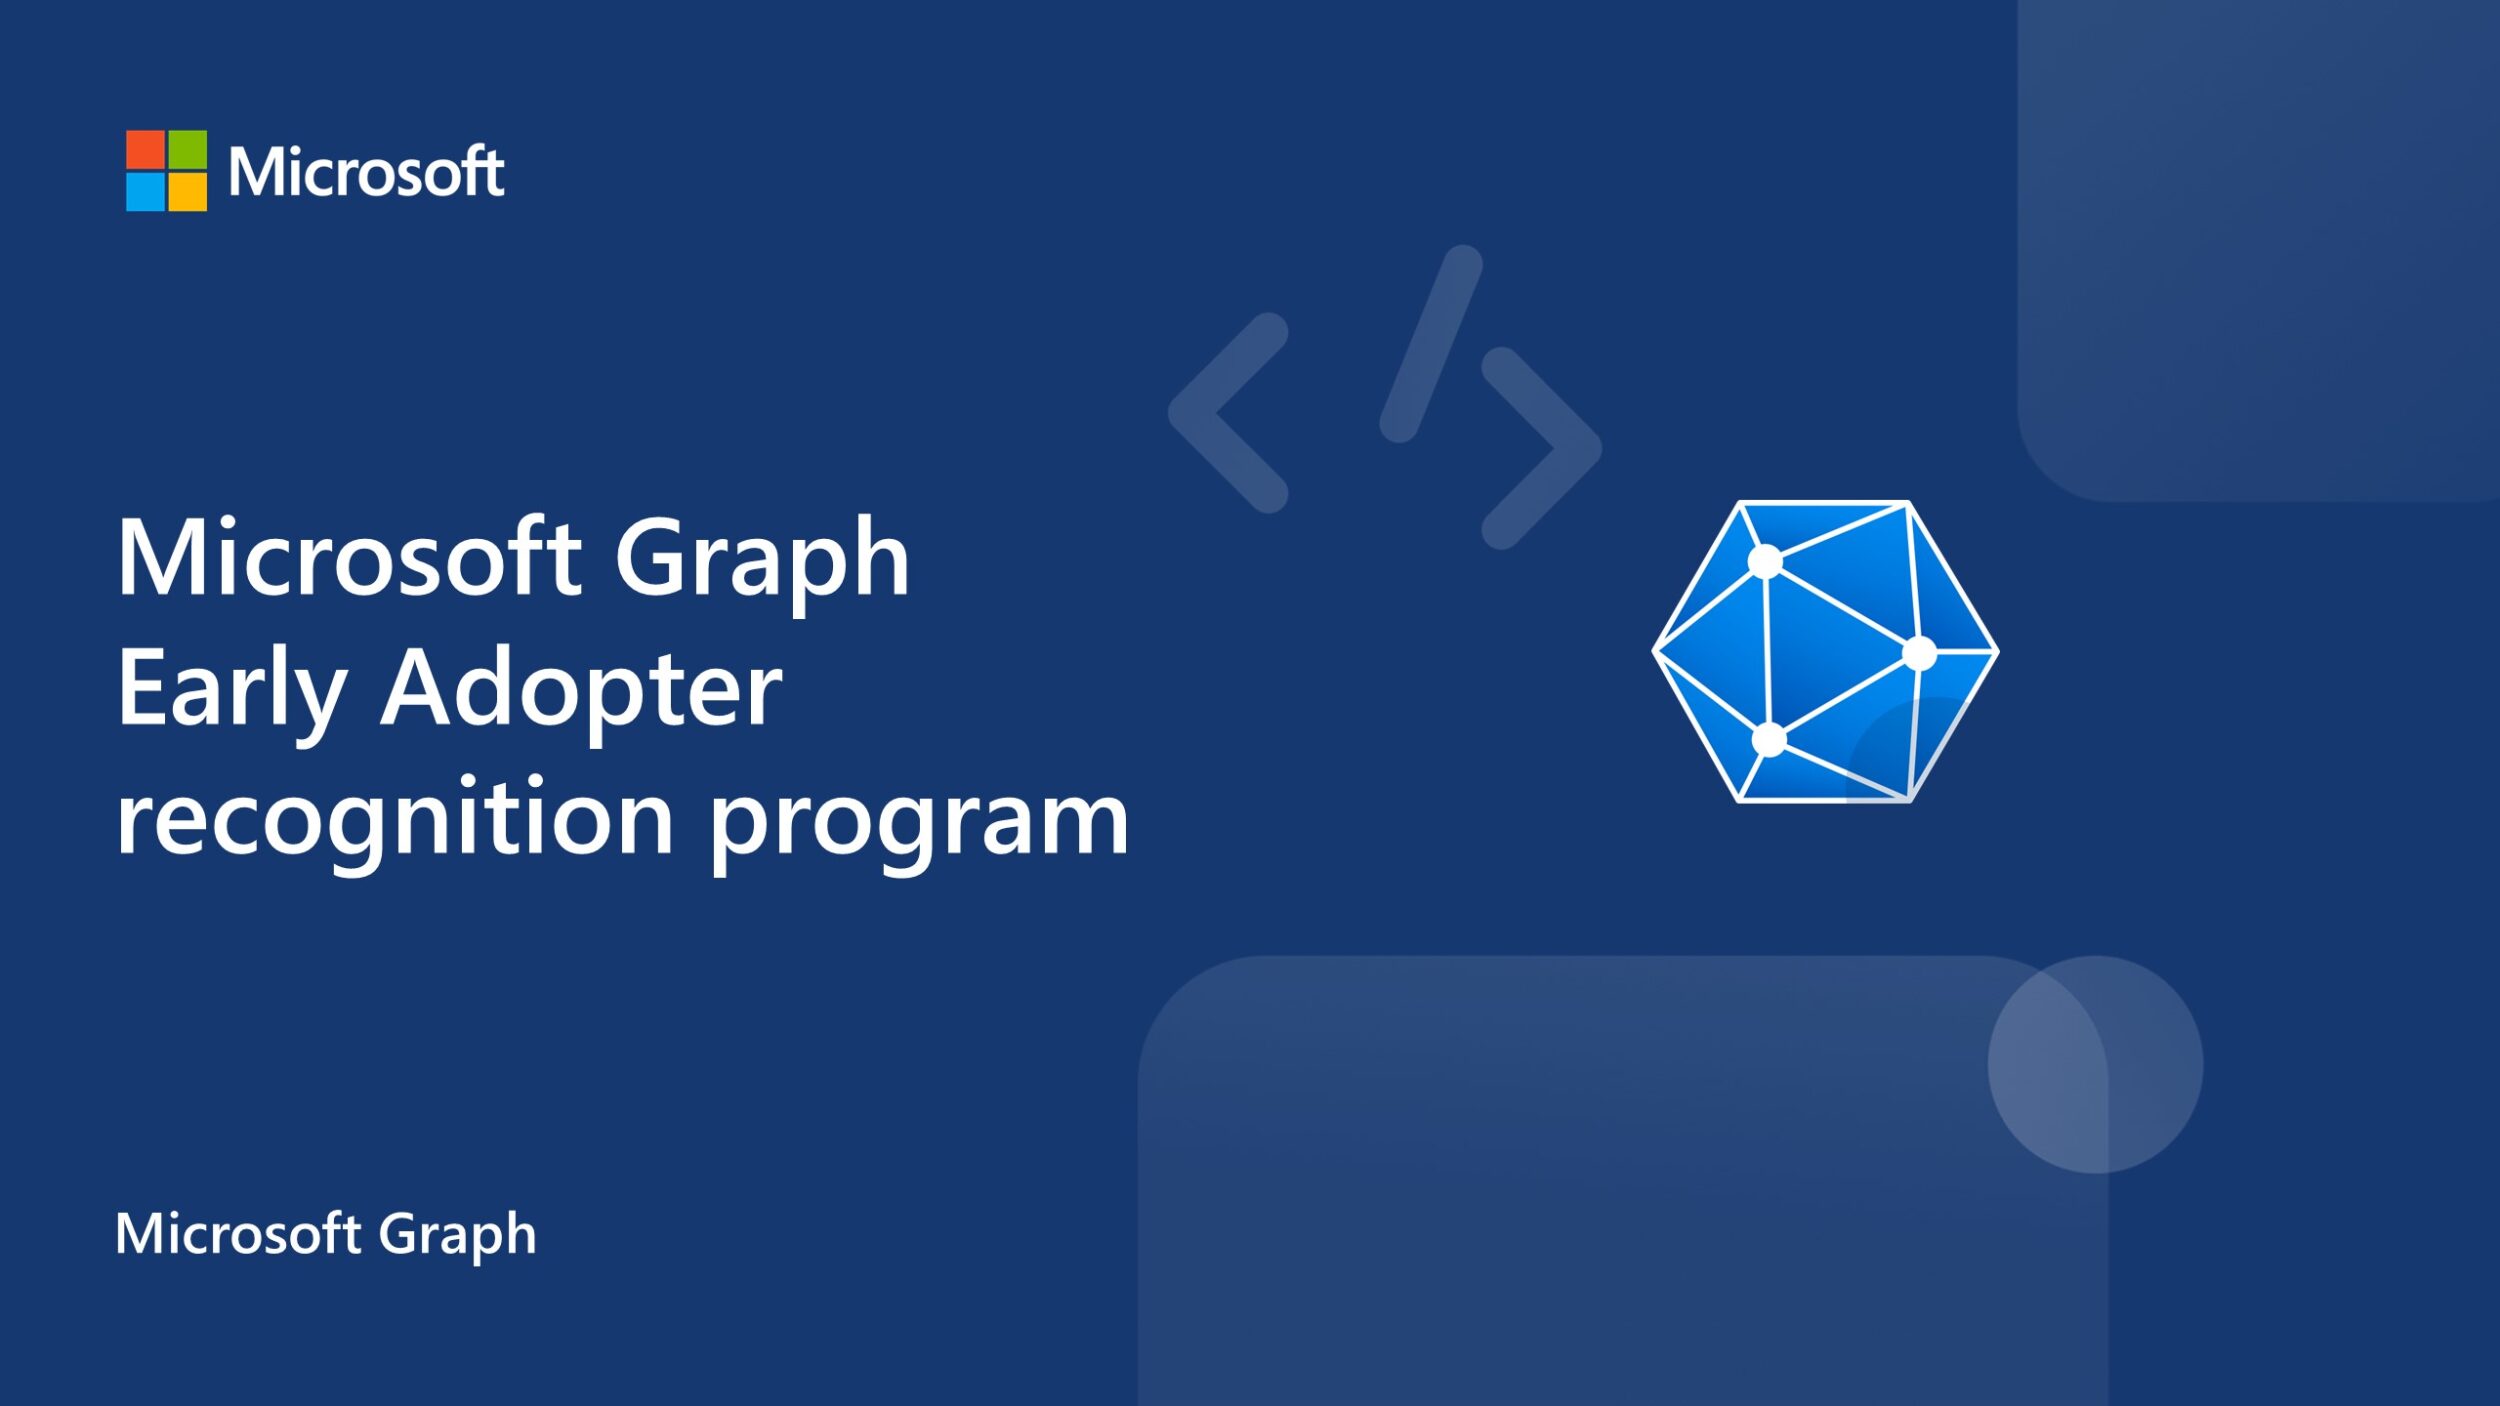 Announcing the Microsoft Graph Early Adopter recognition program